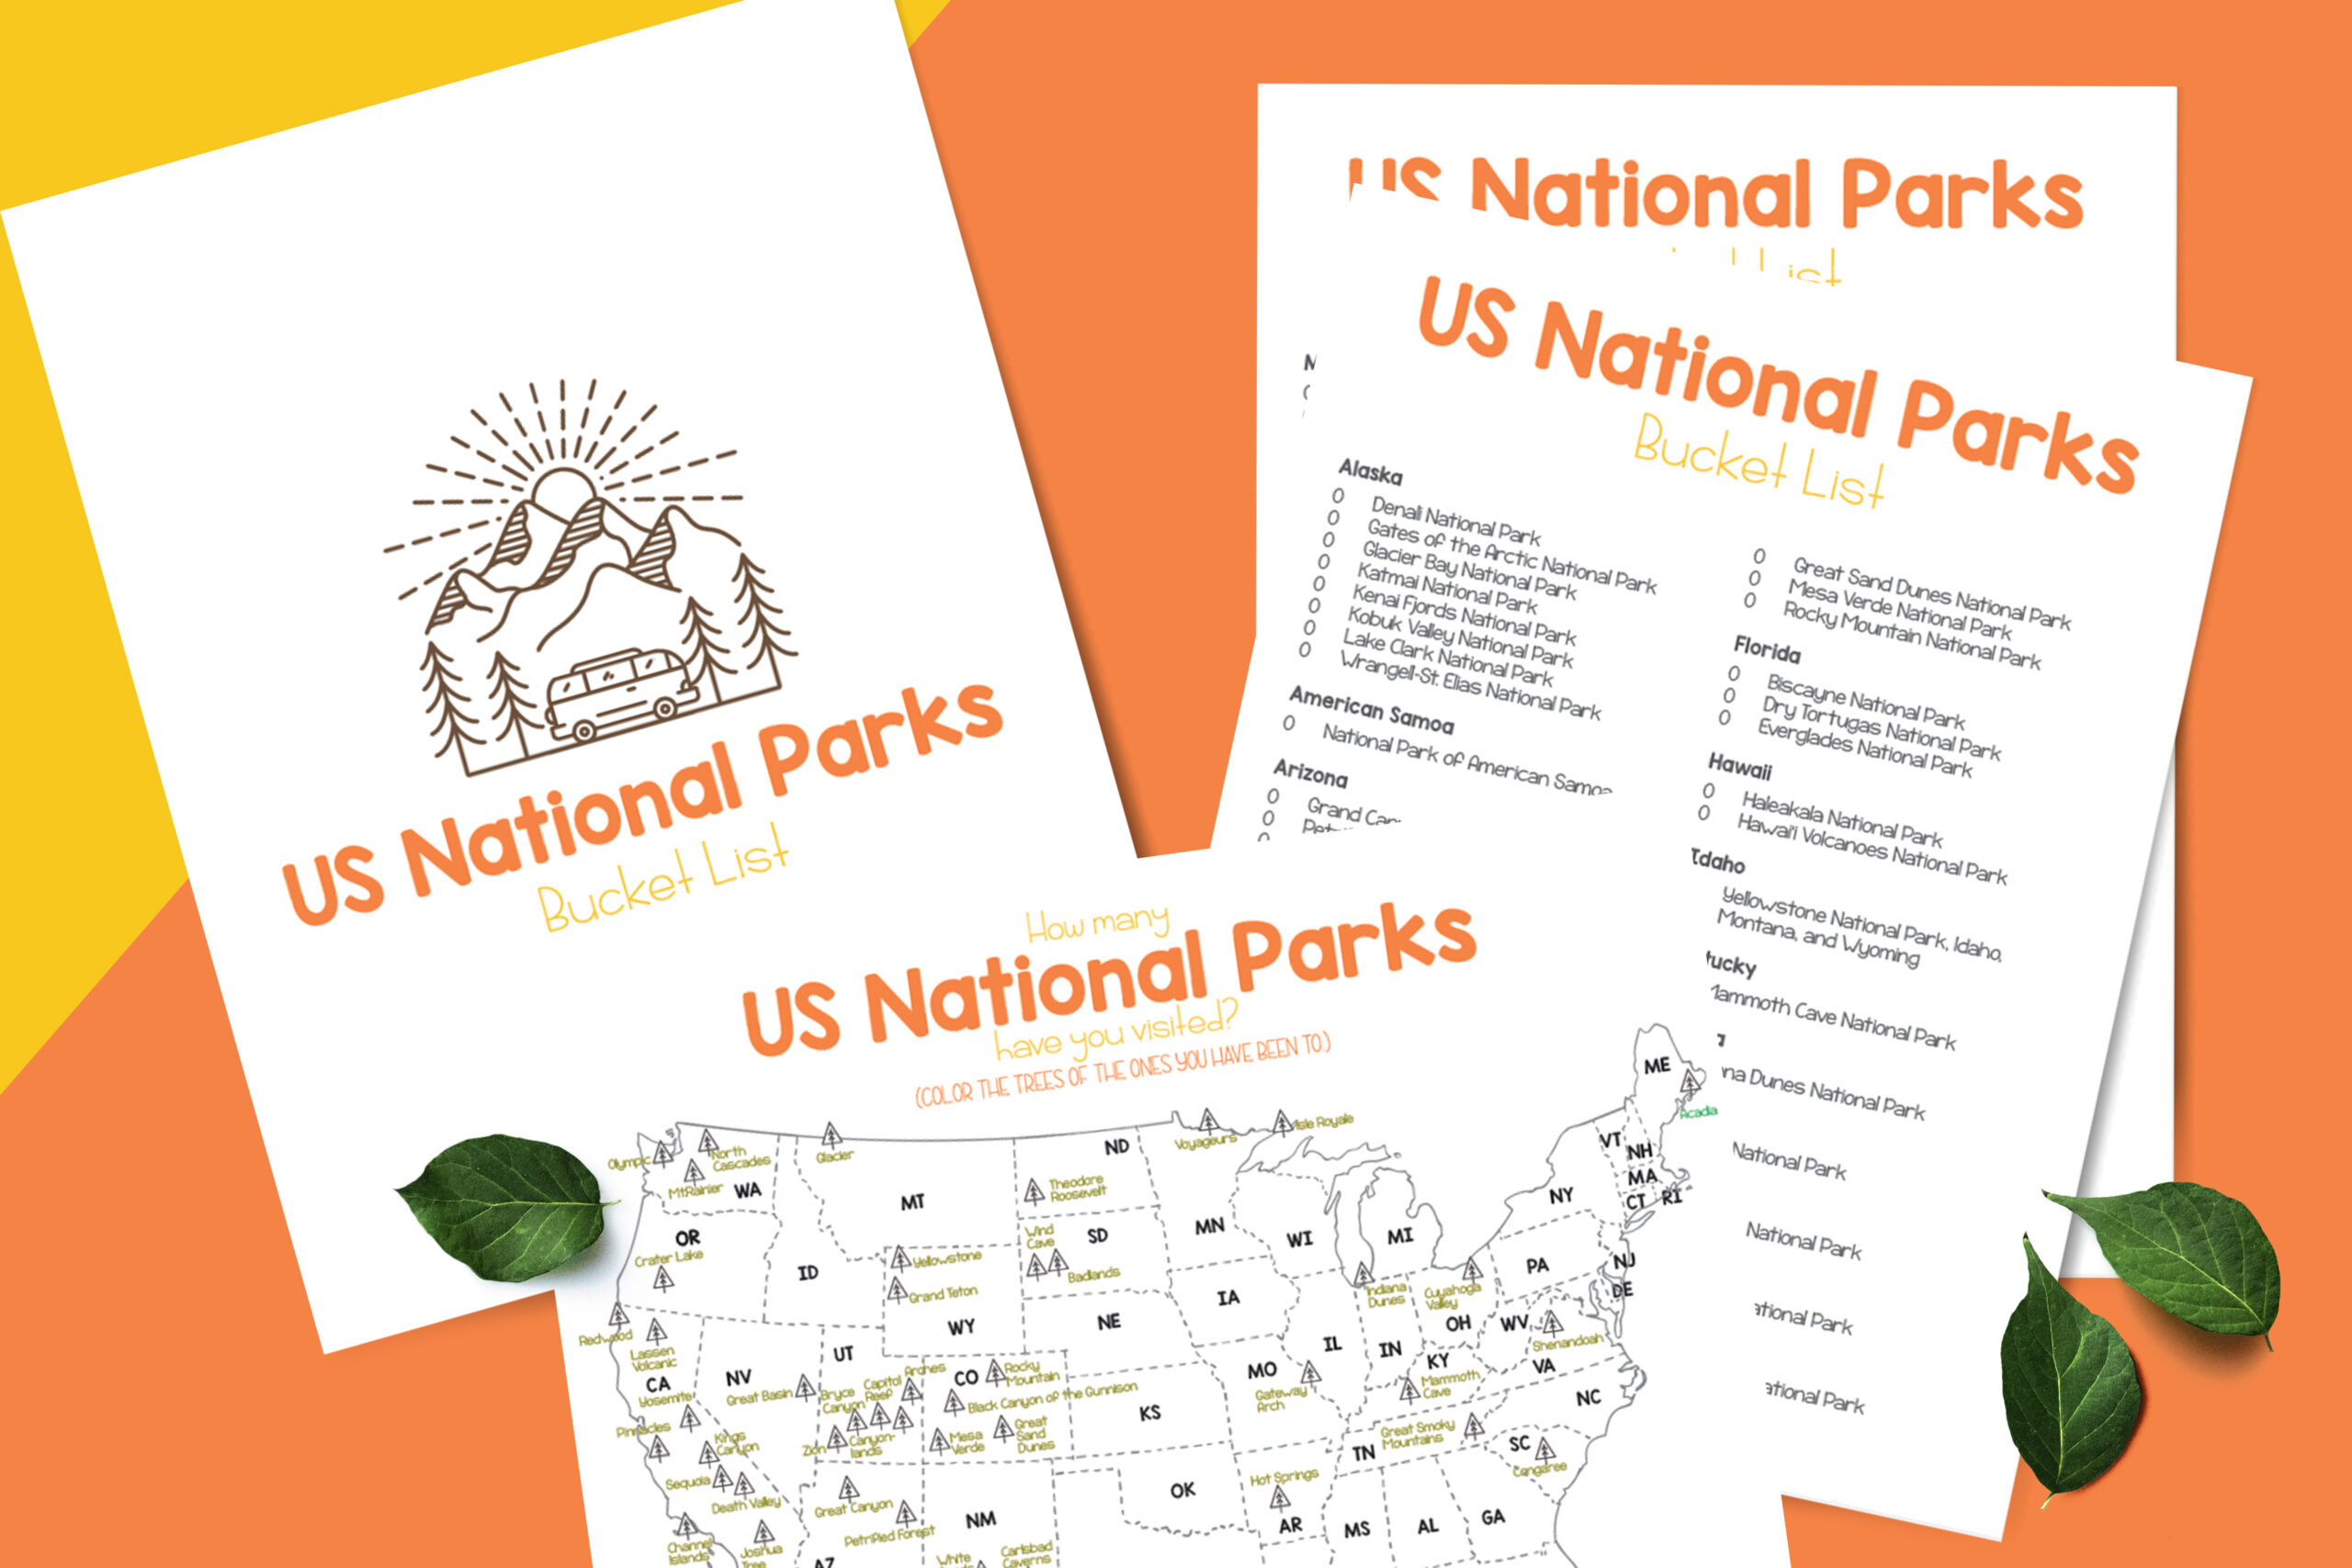 printable US National Parks map and checklist on orange background